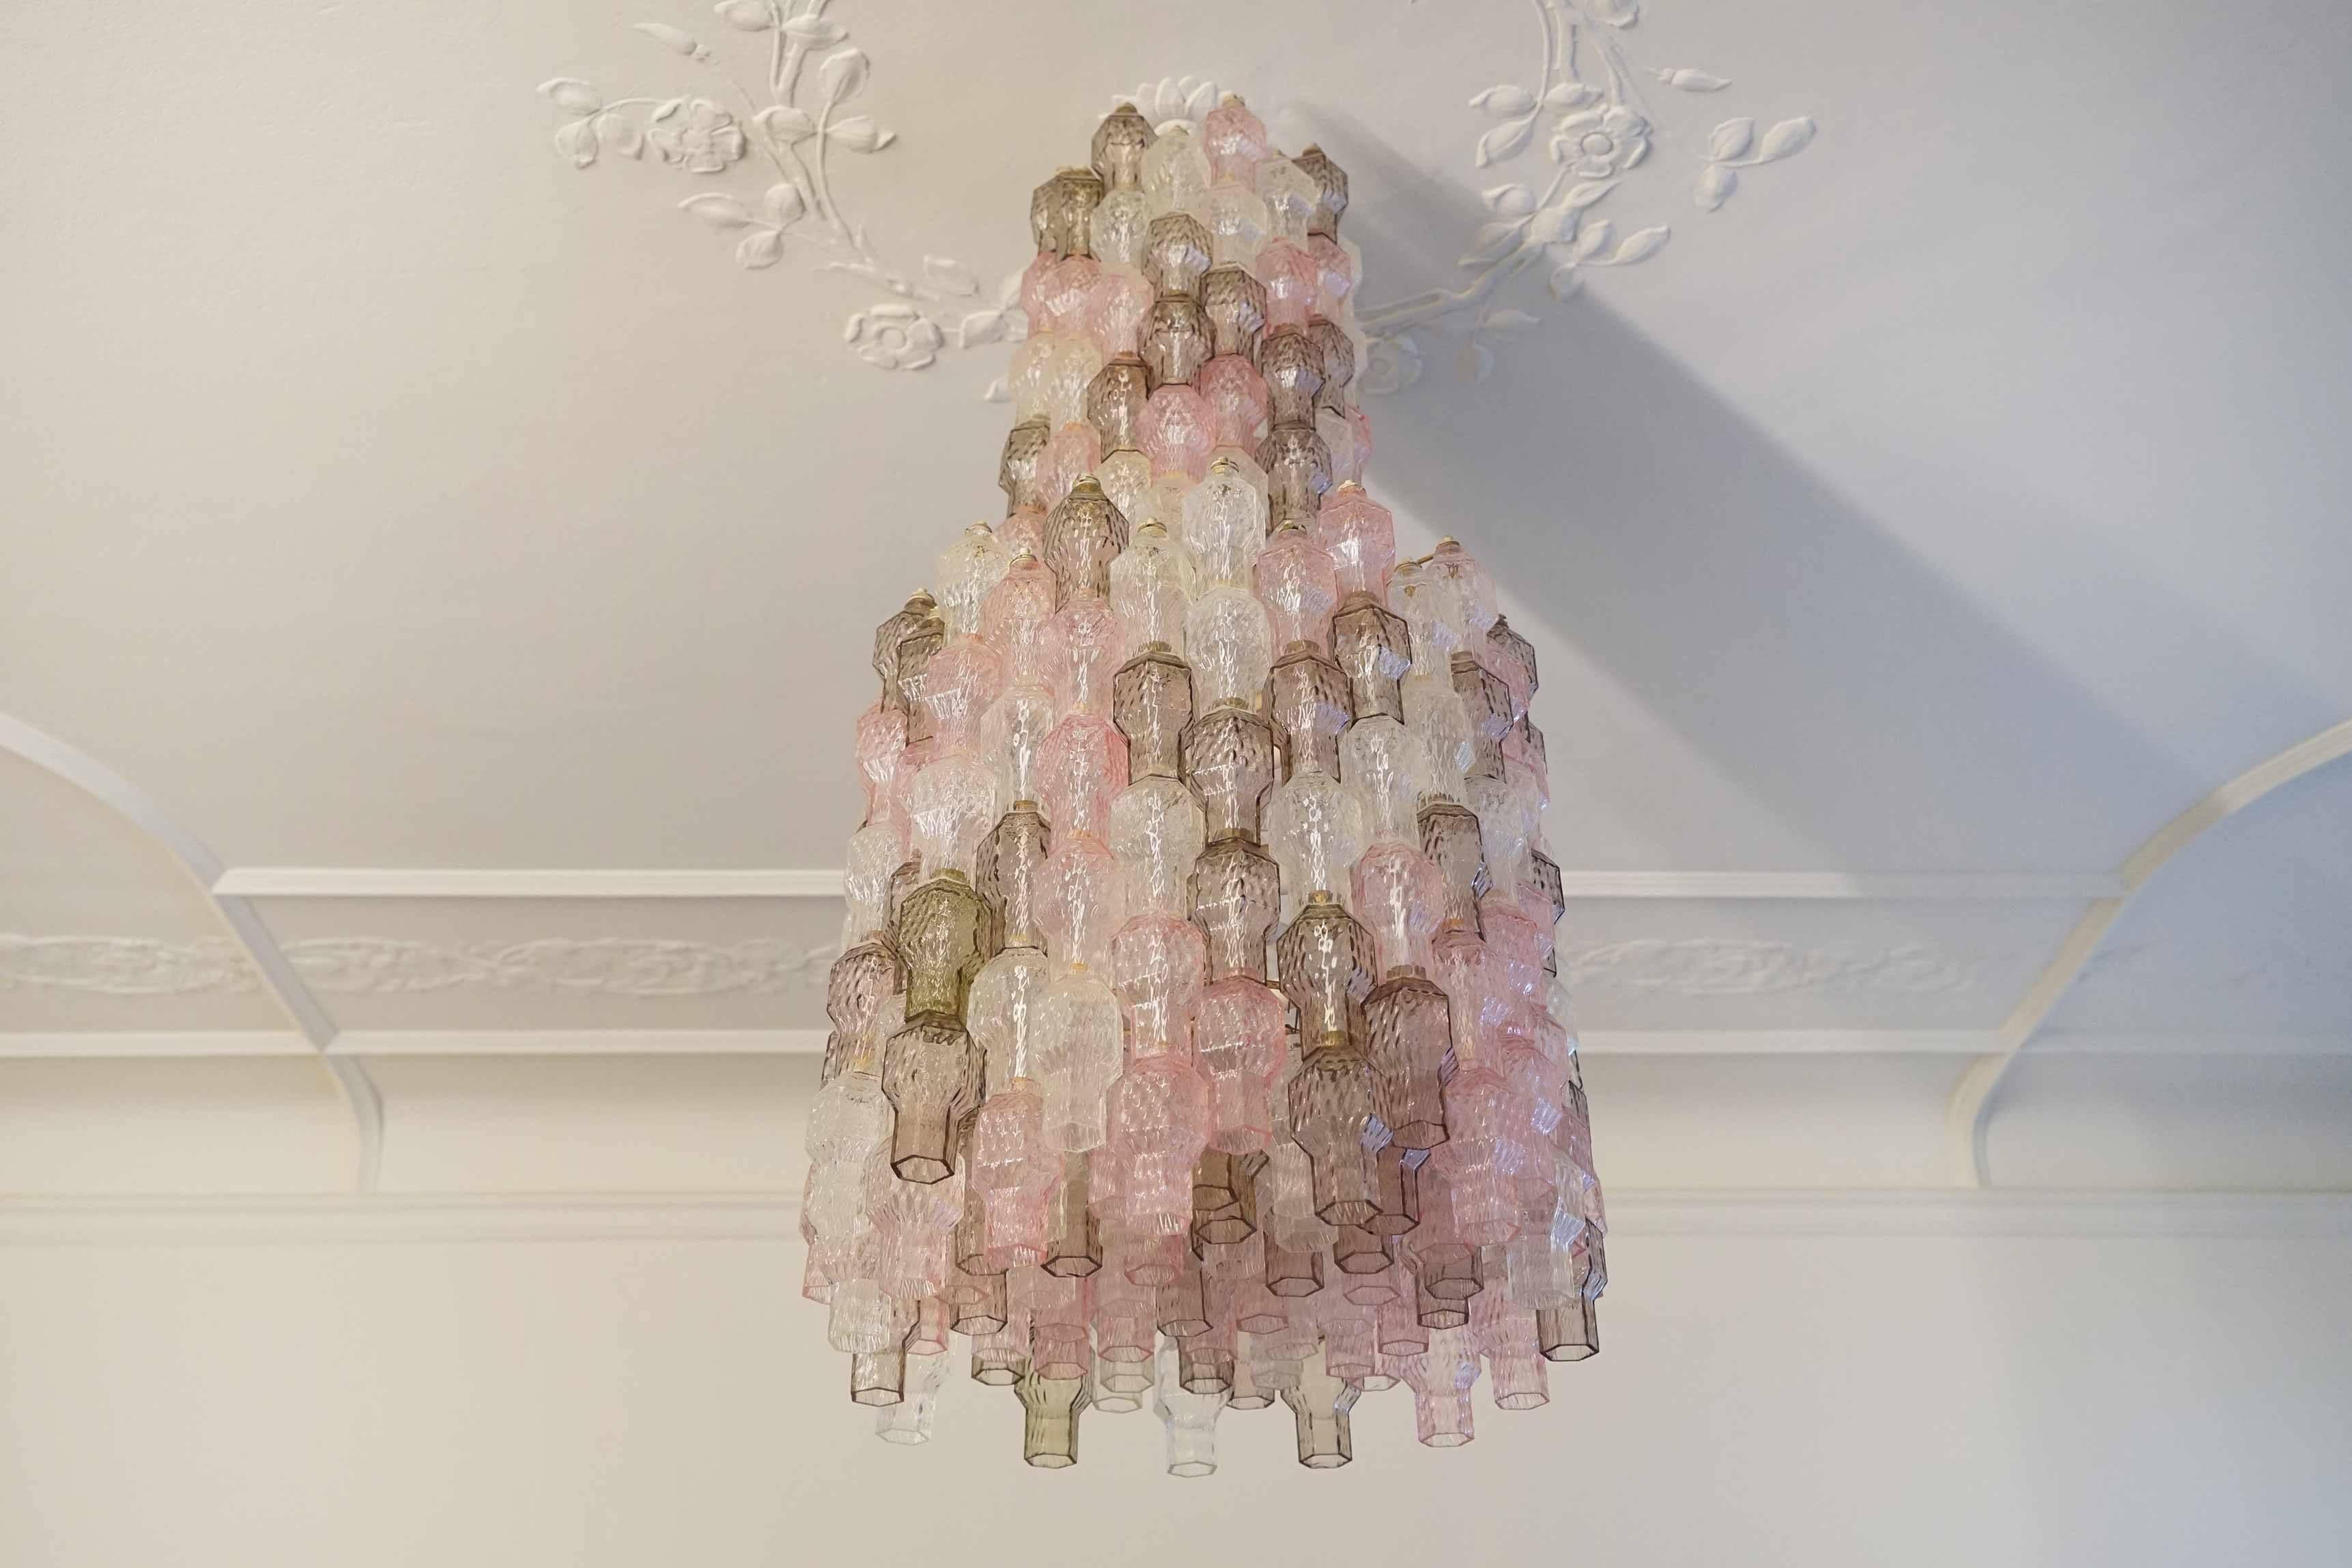 Chandelier by Archimede Seguso, Italy, circa 1958, Prod. Segues Murano.
Hundrets of Murano glass strands mounted on solid metal suspension, newly electrified.

Provenance Hotel Royal Spotorno Italy.